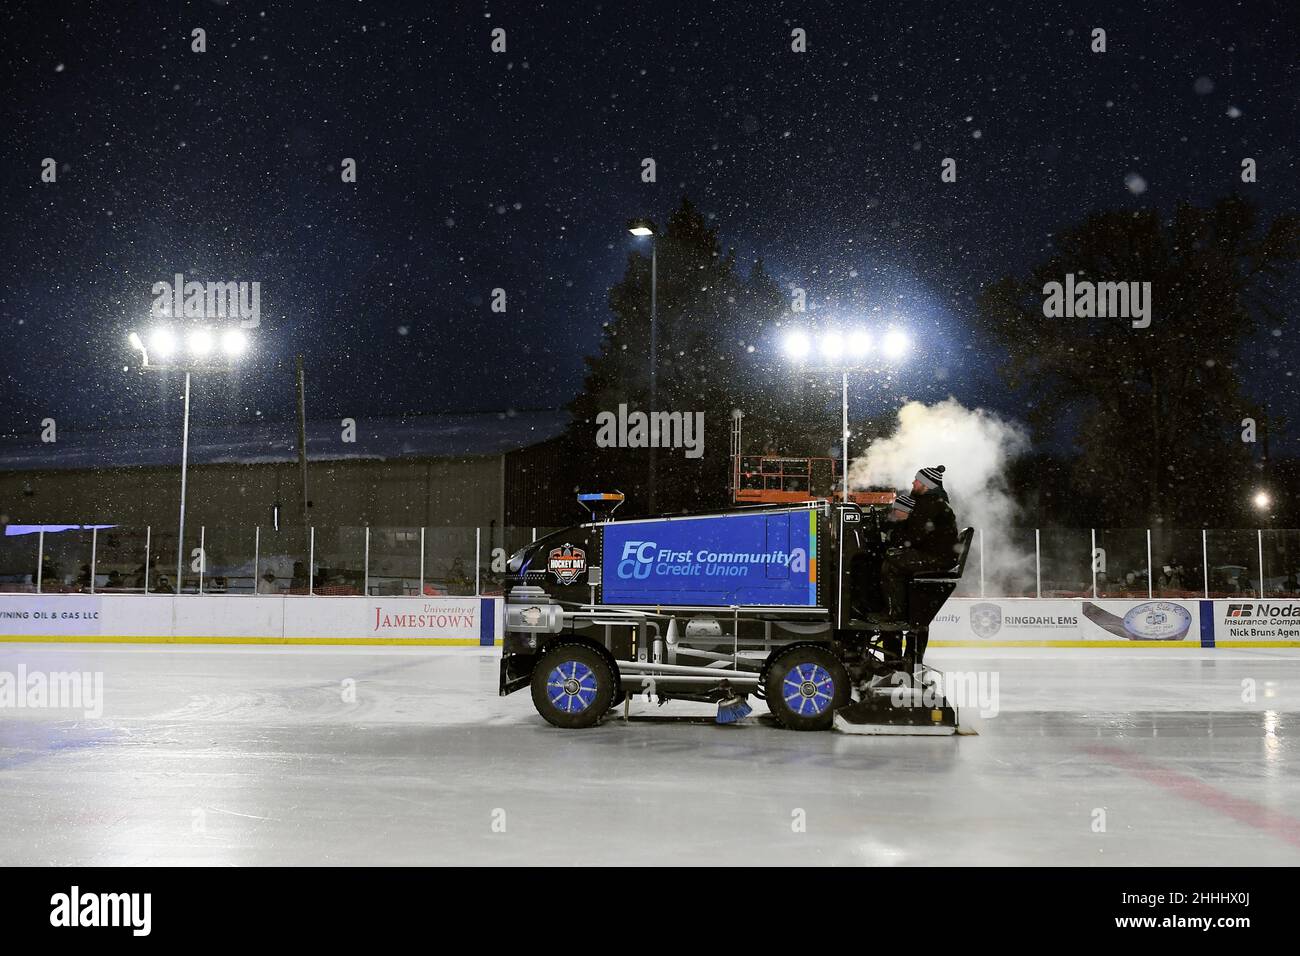 A Zambonni cleans the ice during the 3rd annual Hockey Day North Dakota outdoor hockey event in Jamestown, ND. Youth, high school and college hockey teams from around North Dakota competed over two days. By Russell Hons/CSM Stock Photo